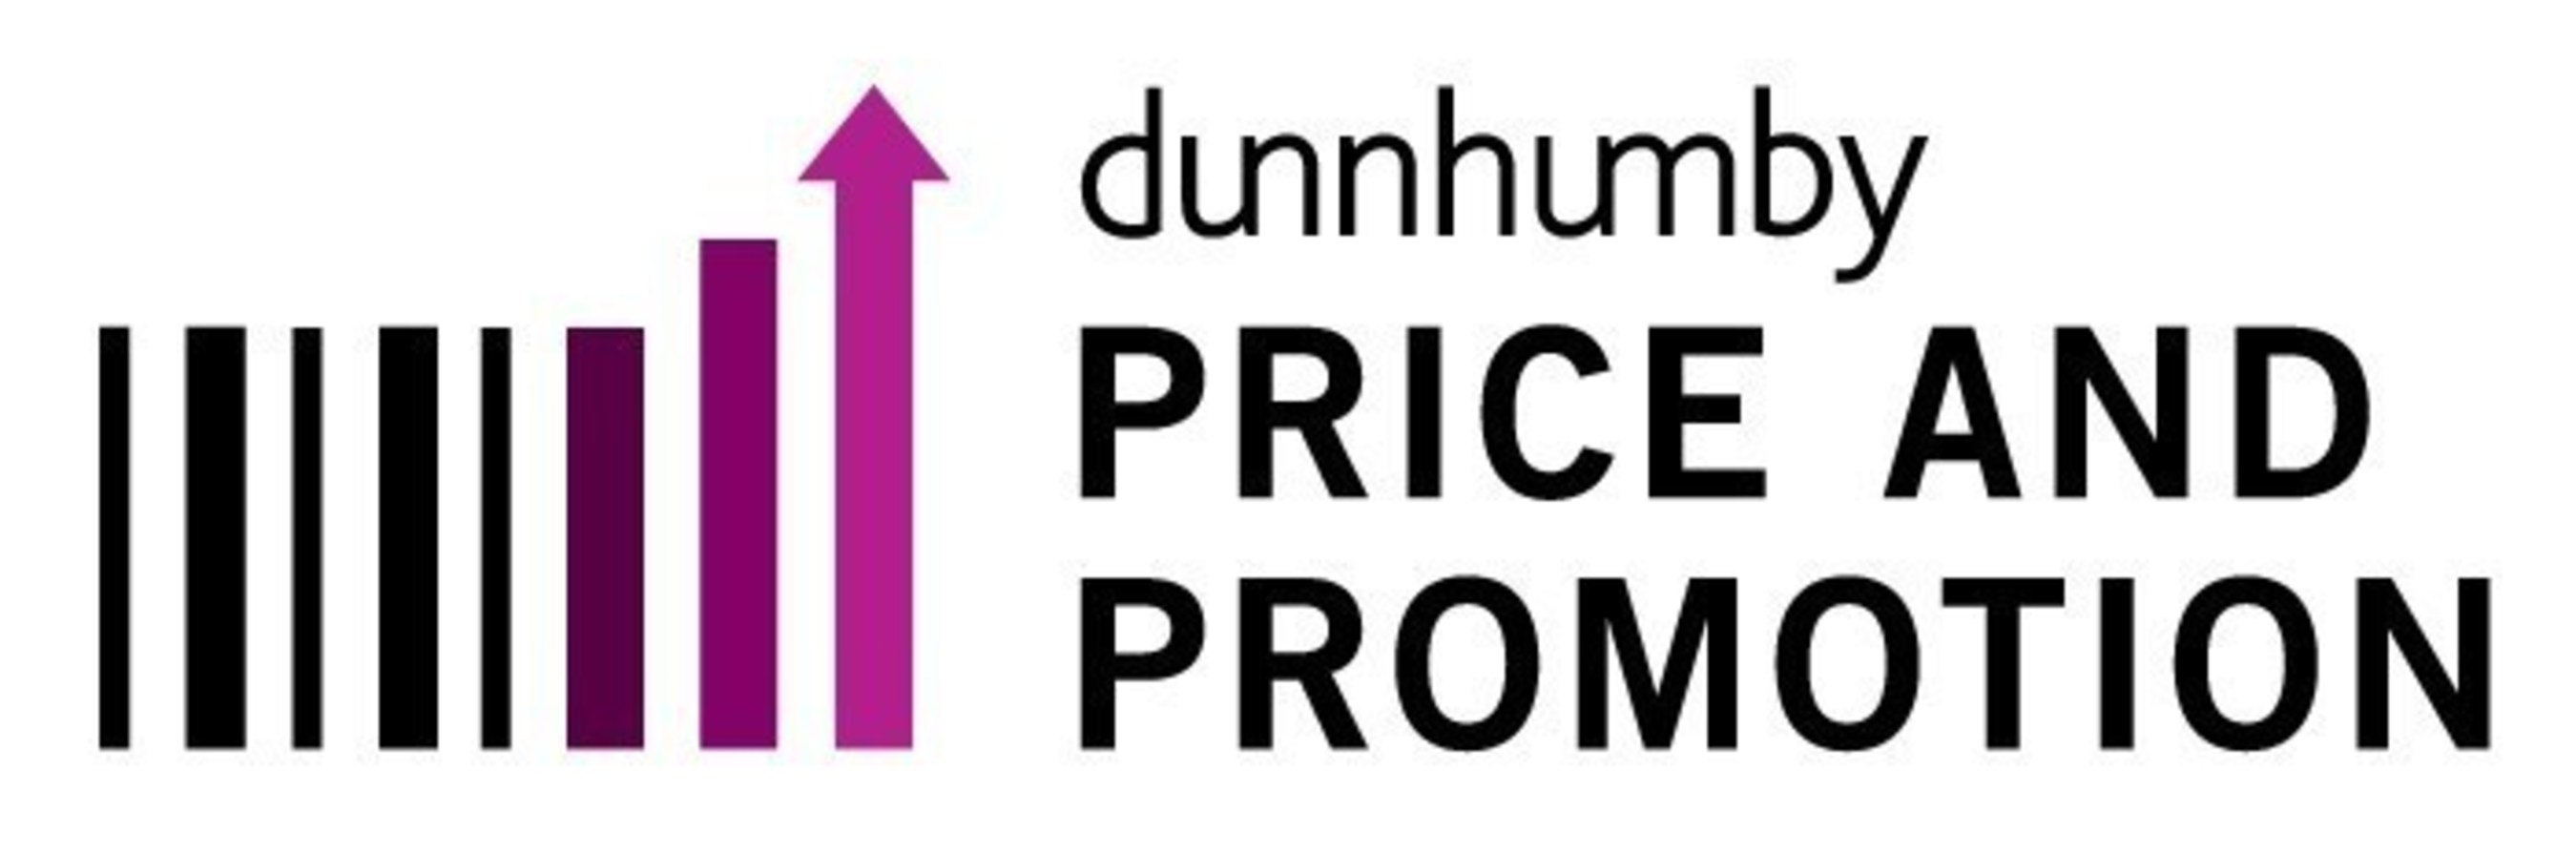 dunnhumby Price and Promotion